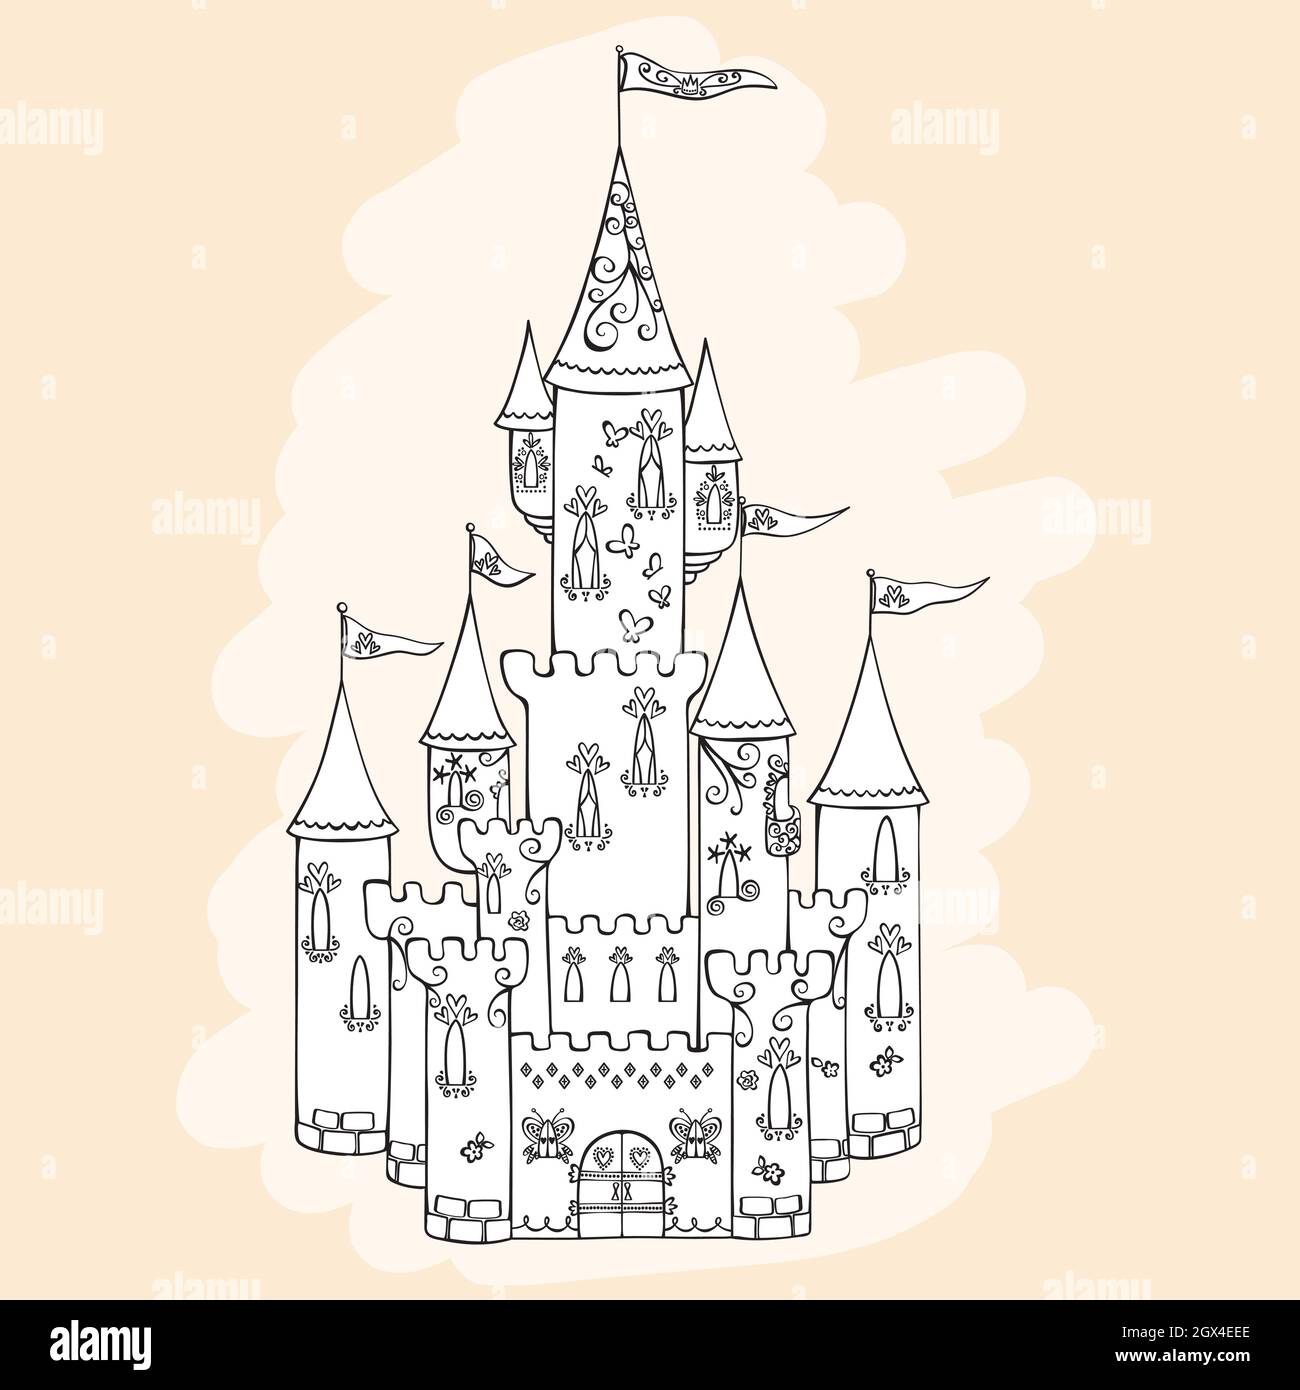 Hand Drawn Castle. Princess Royal Palace. Fairy tale illustration. Hearts, butterflies, flags, tower. Black and white. Stock Vector